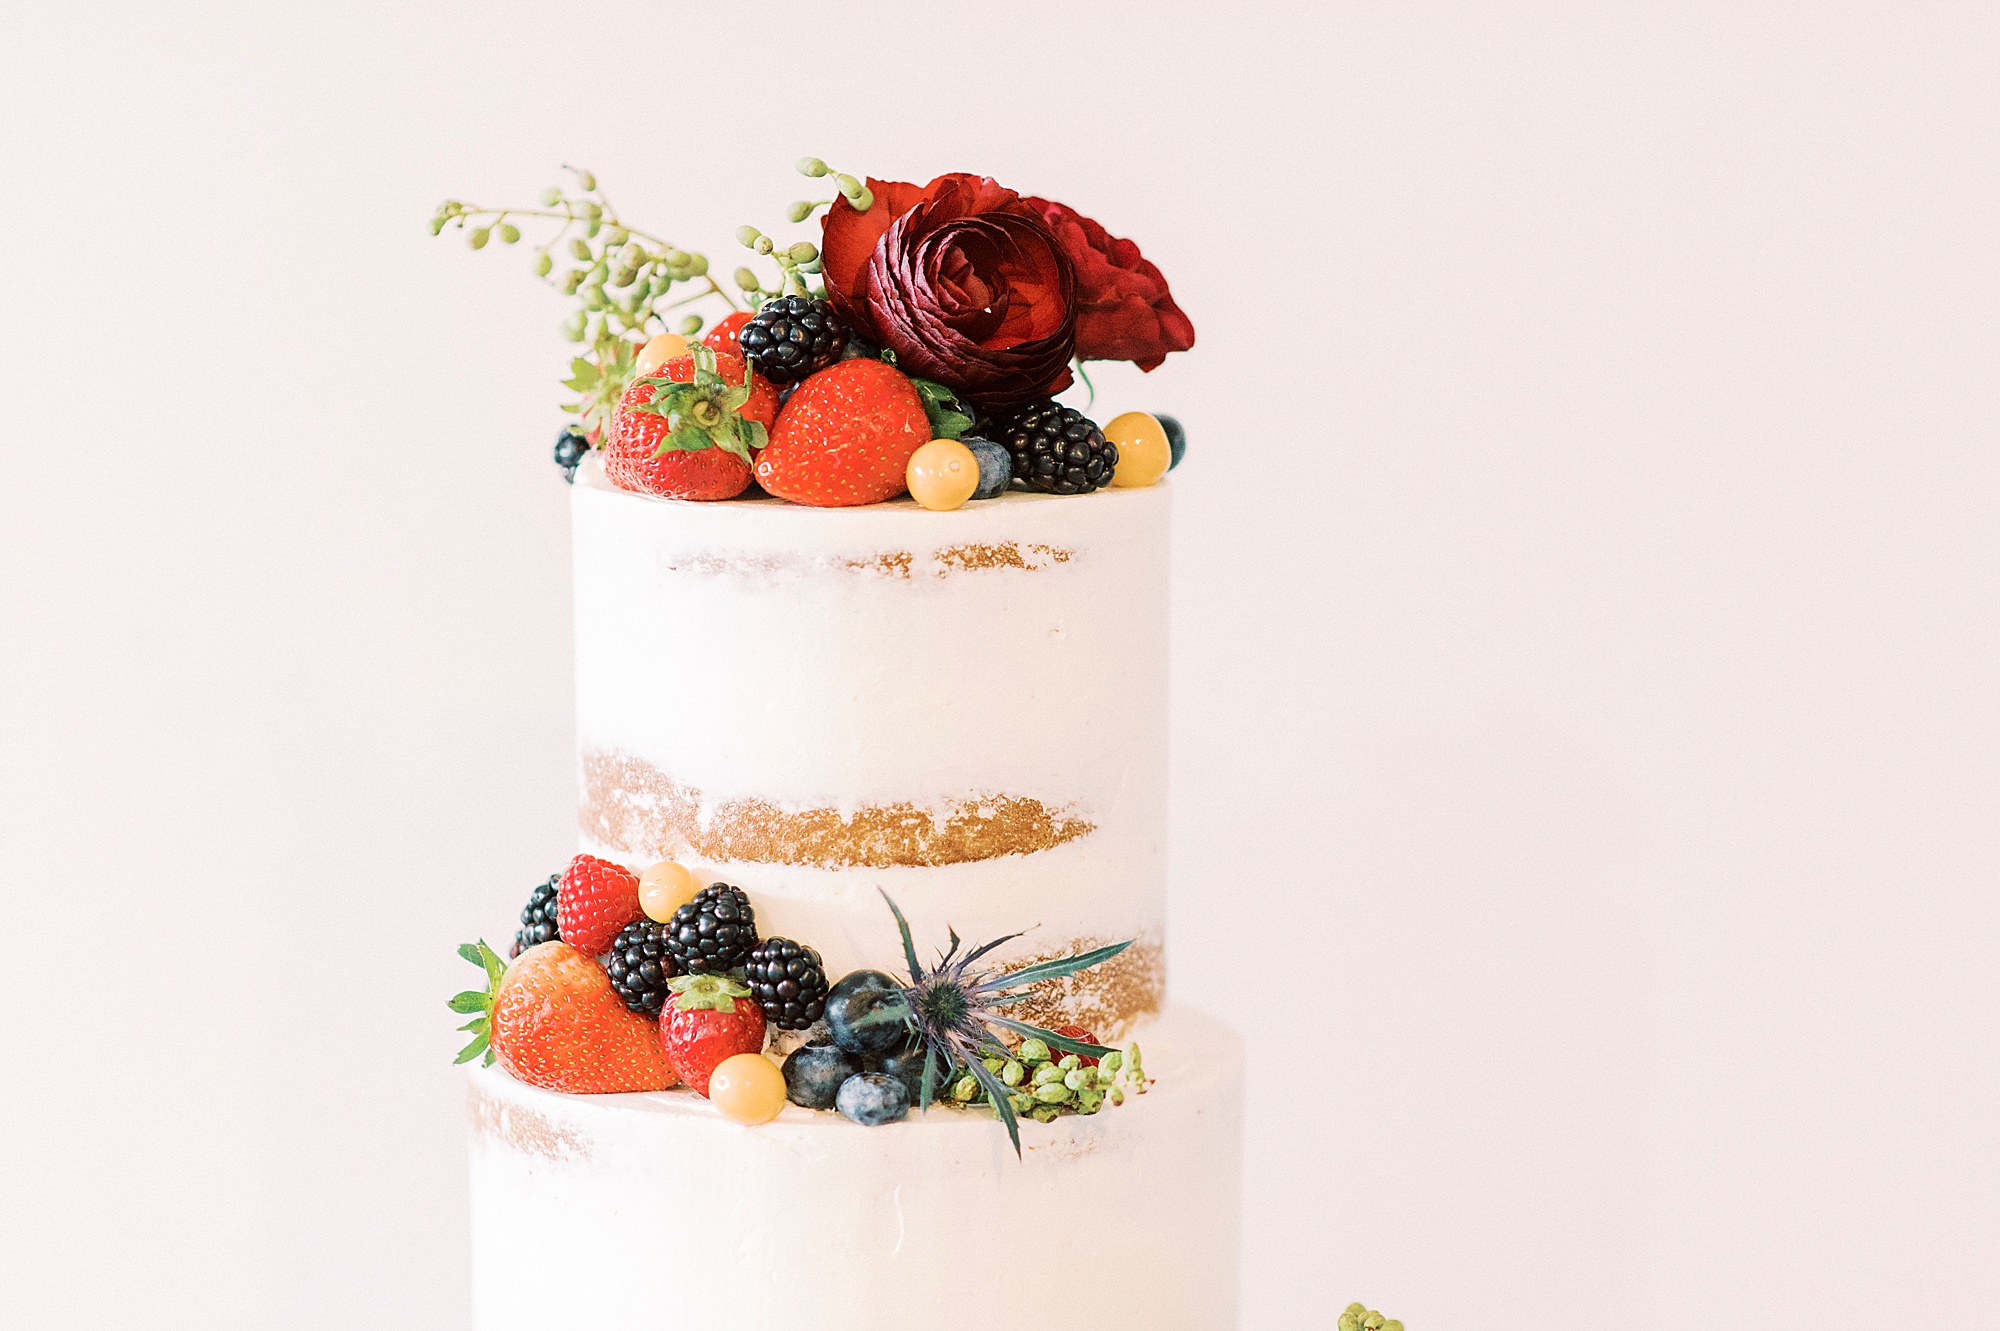 naked wedding cake with fruit on top for NC wedding reception